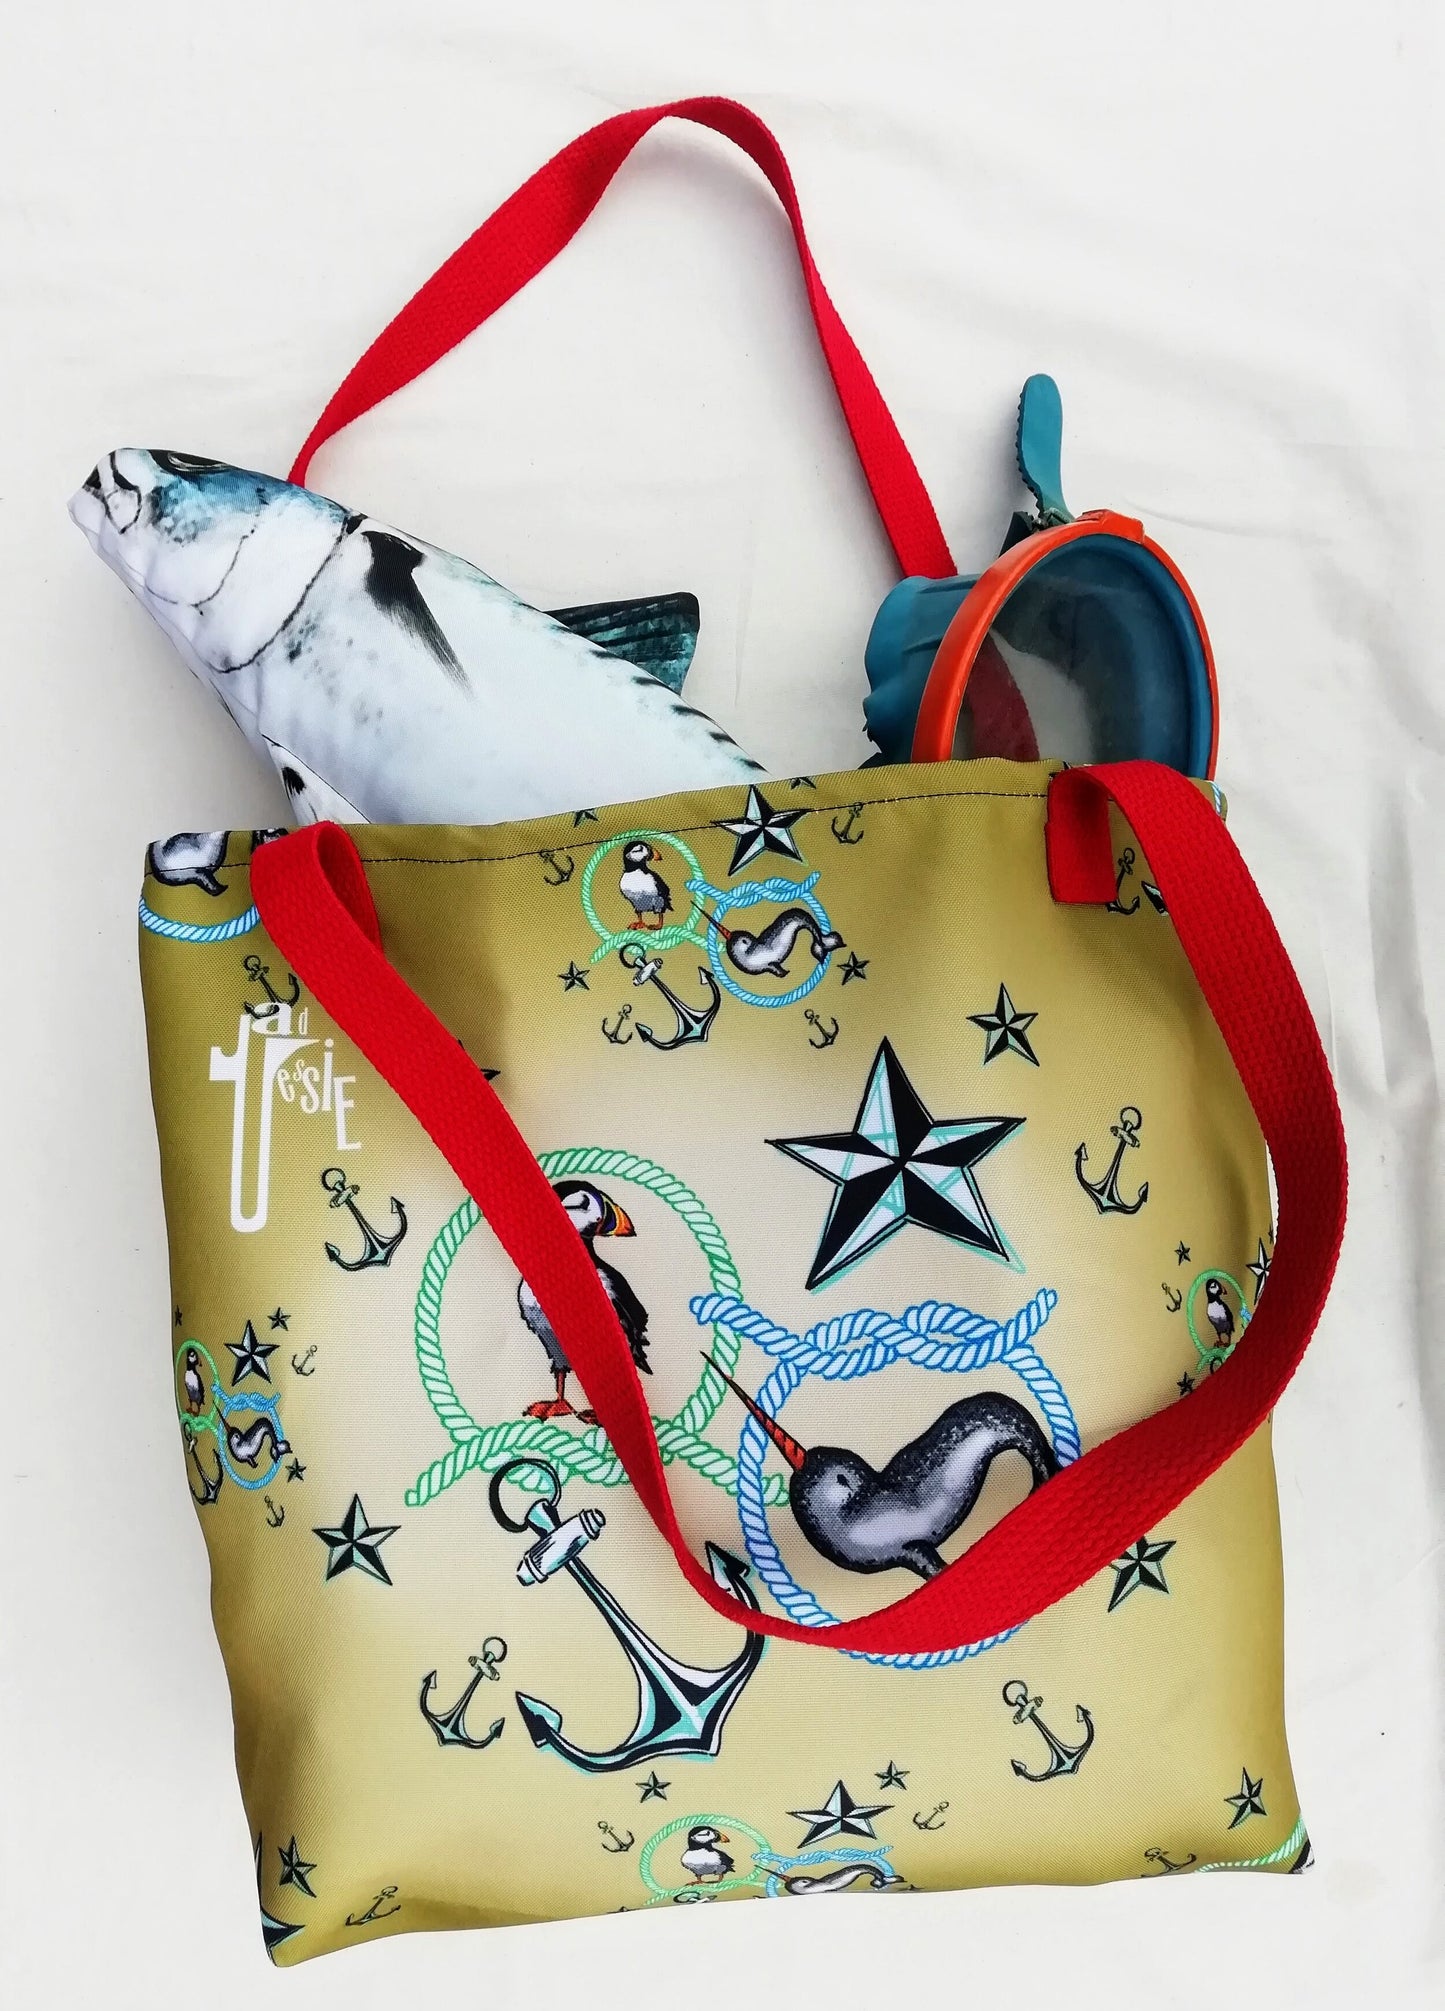 Puffins &amp; Narwhals Bespoke Luxury Tote - Limited (only 25 available!)